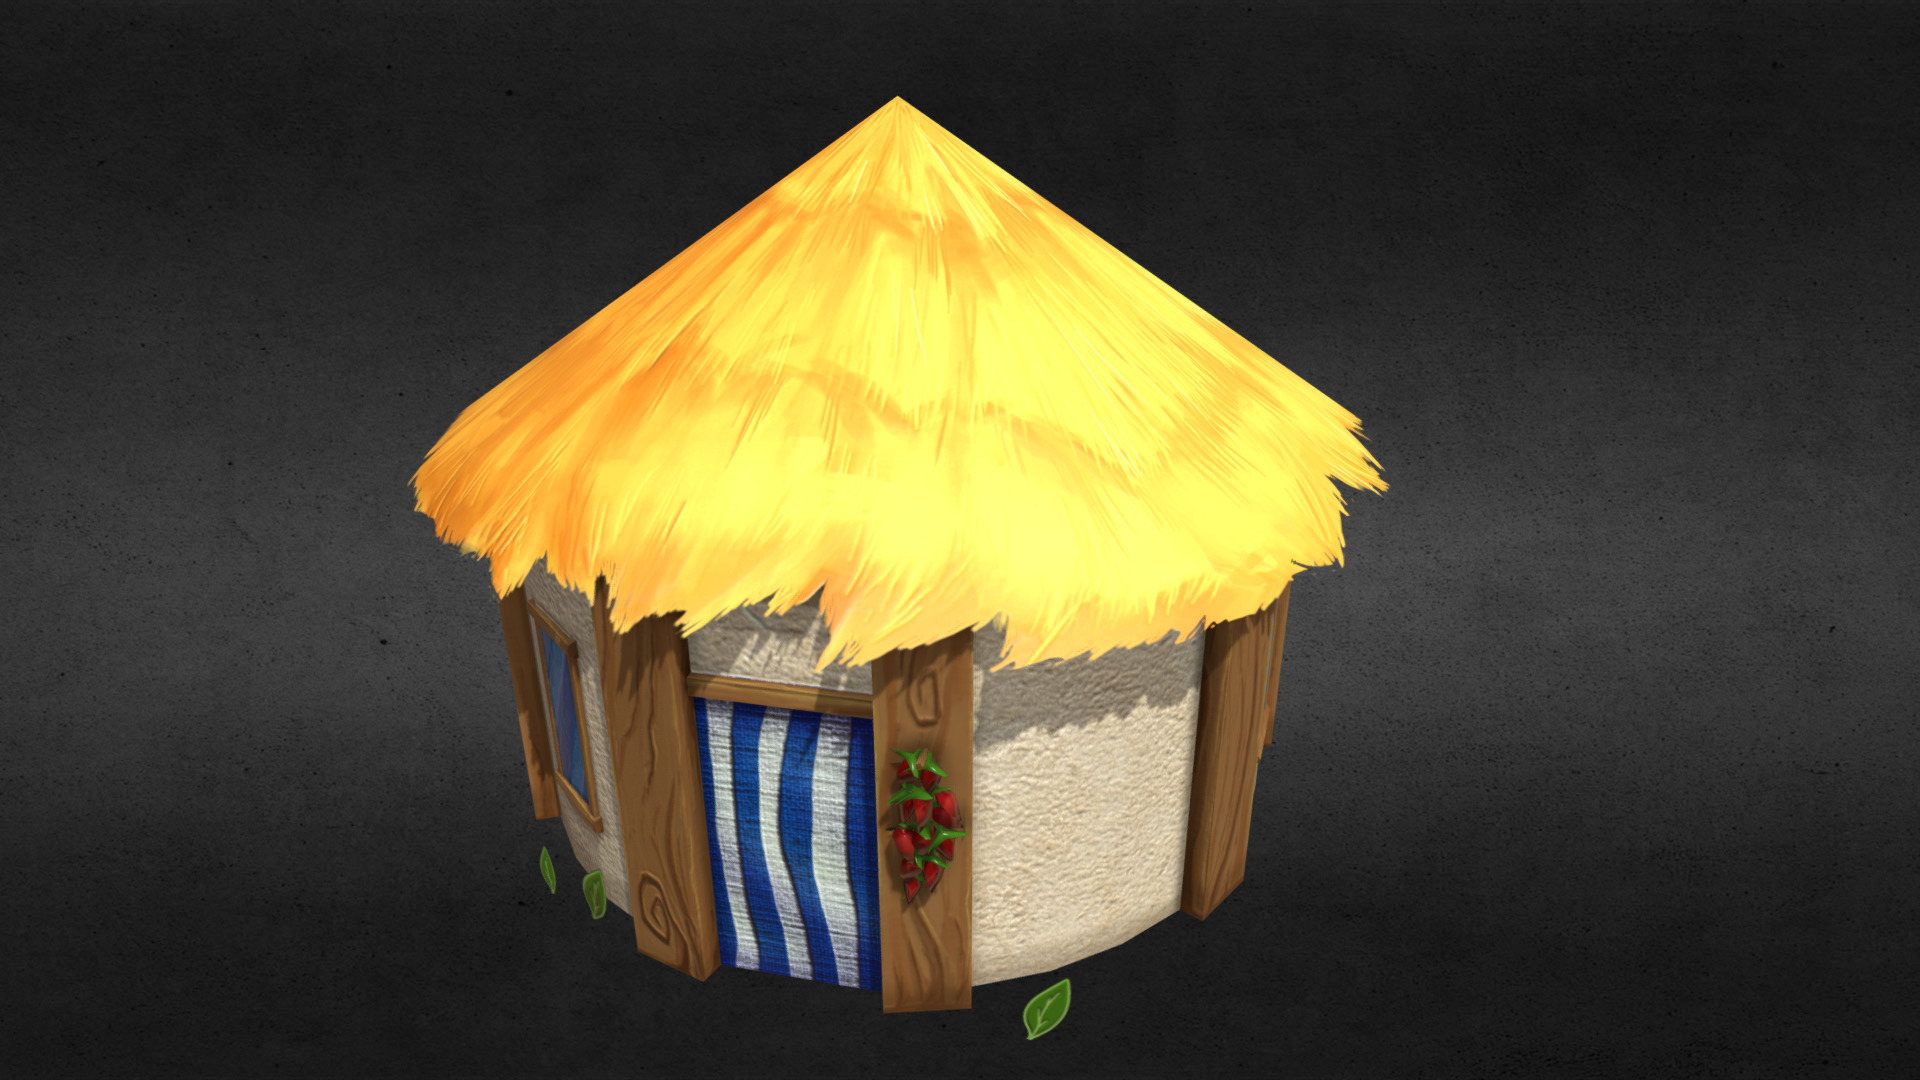 3D model Low poly stylized tribal tropical hut - This is a 3D model of the Low poly stylized tribal tropical hut. The 3D model is about a yellow umbrella with a blue and white striped umbrella.